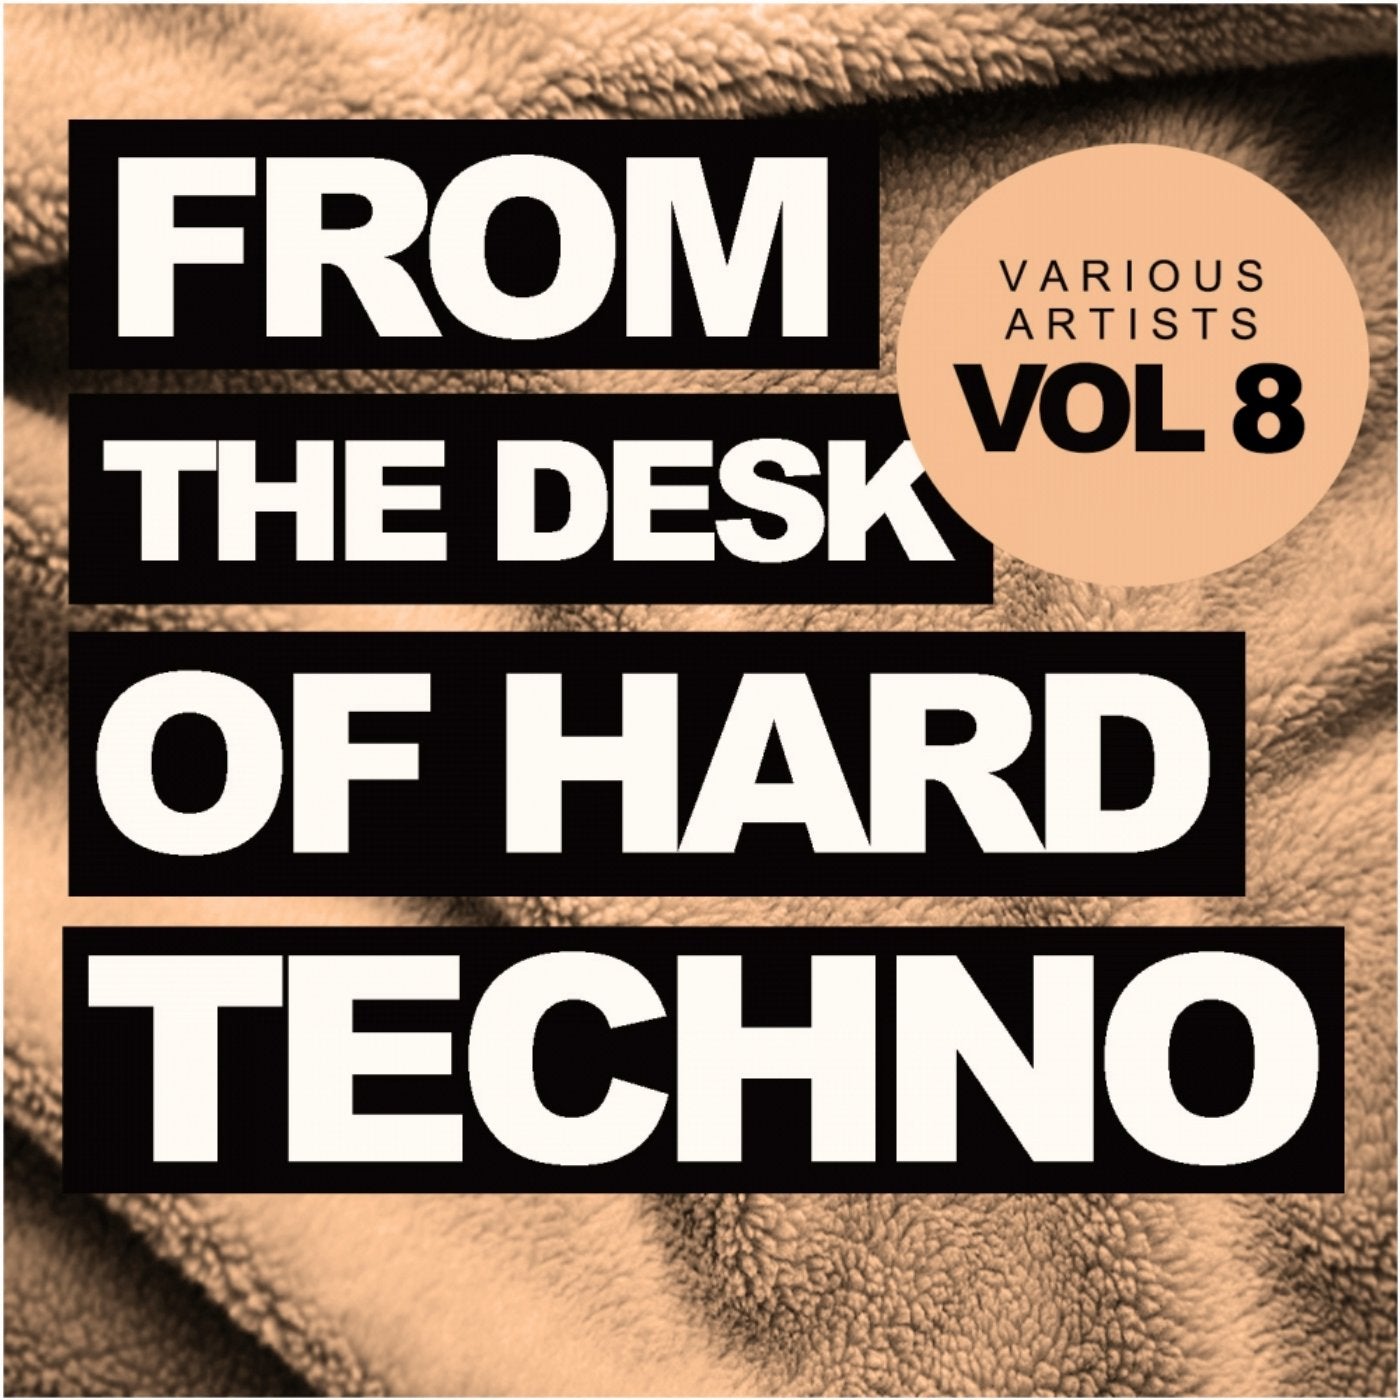 From The Desk Of Hard Techno, Vol.8